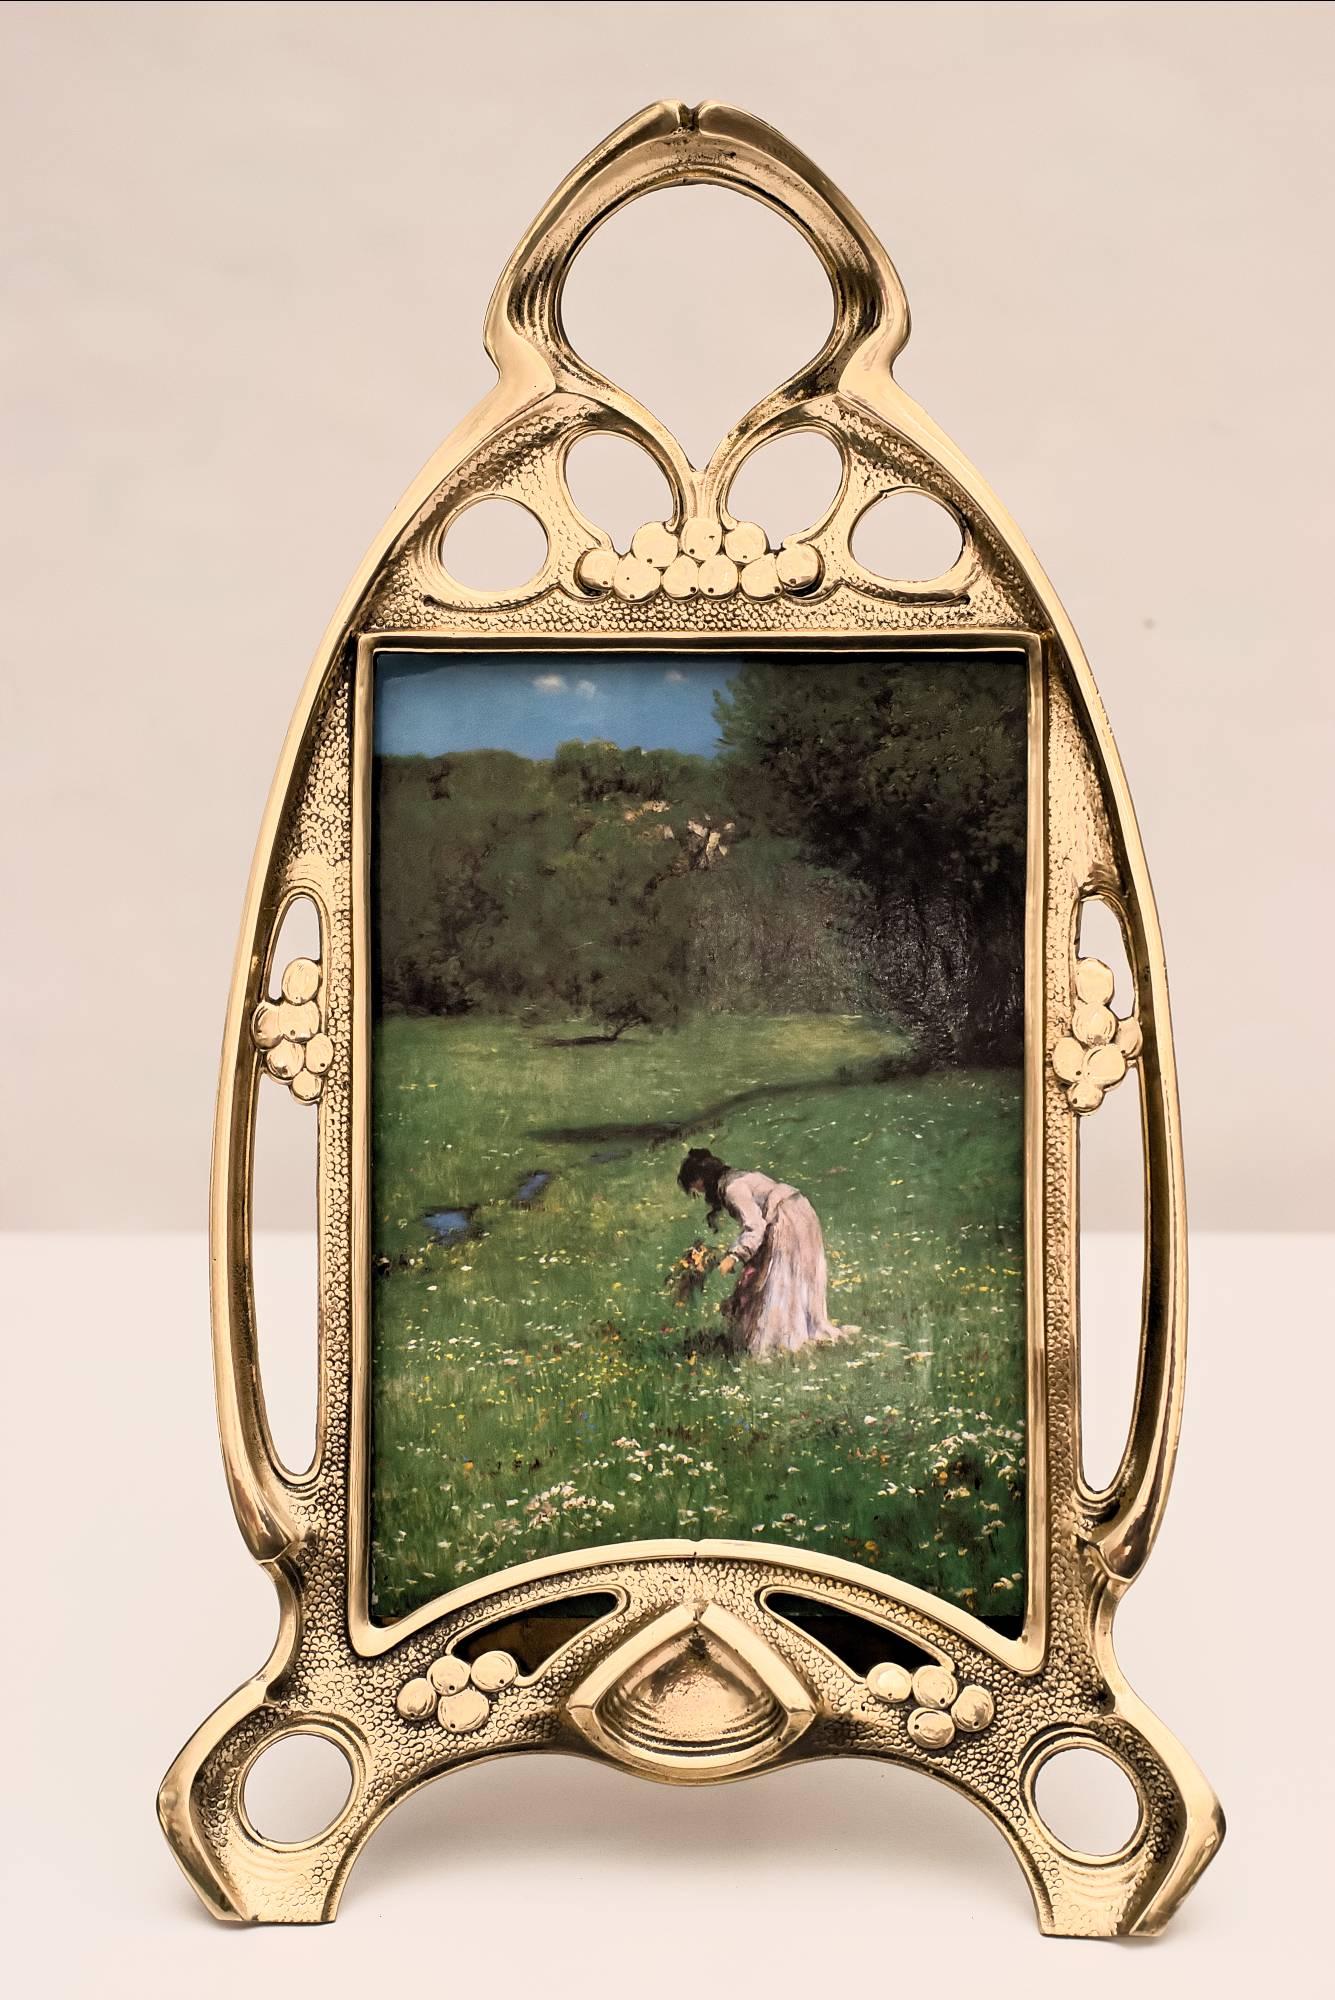 Solid Art Nouveau picture frame
polished and stove enamelled.